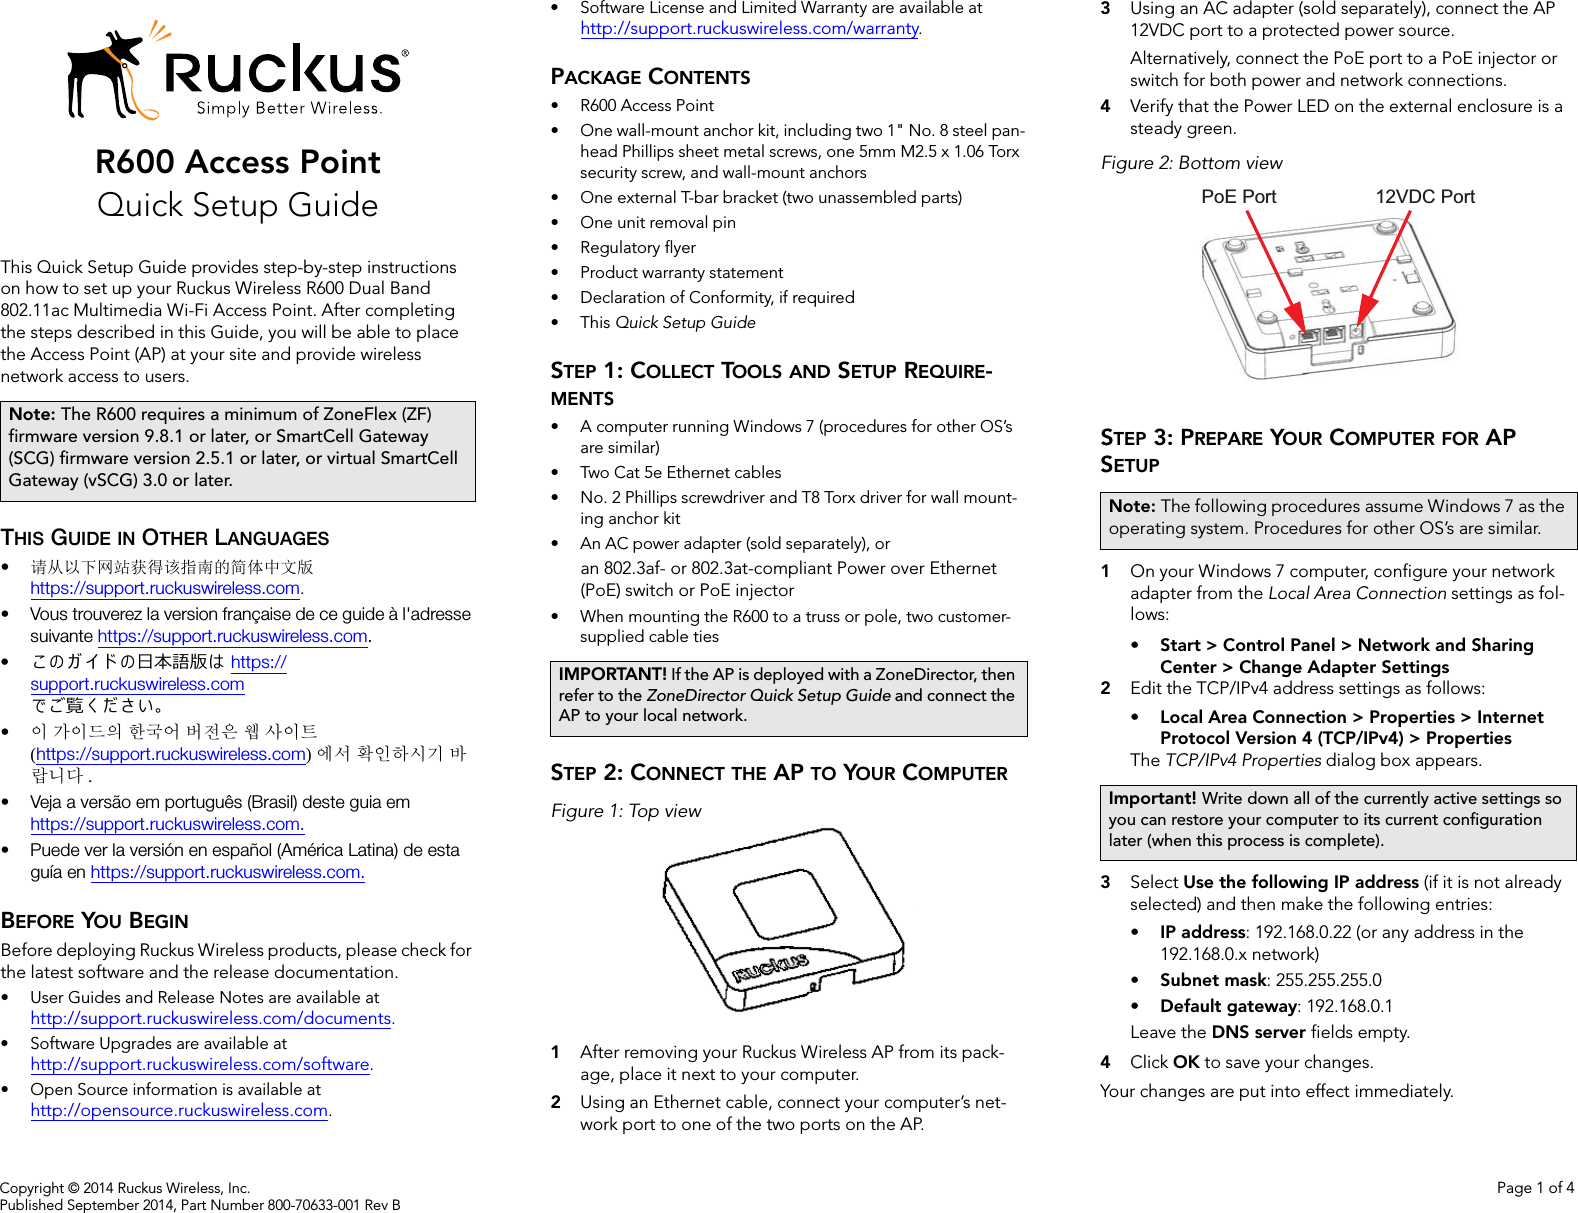 Copyright © 2014 Ruckus Wireless, Inc. Page 1 of 4Published September 2014, Part Number 800-70633-001 Rev BR600 Access PointQuick Setup GuideThis Quick Setup Guide provides step-by-step instructions on how to set up your Ruckus Wireless R600 Dual Band 802.11ac Multimedia Wi-Fi Access Point. After completing the steps described in this Guide, you will be able to place the Access Point (AP) at your site and provide wireless network access to users.THIS GUIDE IN OTHER LANGUAGES•请从以下网站获得该指南的简体中文版 https://support.ruckuswireless.com.• Vous trouverez la version française de ce guide à l&apos;adresse suivante https://support.ruckuswireless.com.•こ の ガ イ ド の日本語版は https://support.ruckuswireless.com でご覧く ださい。•이 가이드의 한국어 버전은 웹 사이트(https://support.ruckuswireless.com)에서 확인하시기 바랍니다 .• Veja a versão em português (Brasil) deste guia em https://support.ruckuswireless.com.• Puede ver la versión en español (América Latina) de esta guía en https://support.ruckuswireless.com.BEFORE YOU BEGINBefore deploying Ruckus Wireless products, please check for the latest software and the release documentation.• User Guides and Release Notes are available at http://support.ruckuswireless.com/documents.• Software Upgrades are available athttp://support.ruckuswireless.com/software.• Open Source information is available athttp://opensource.ruckuswireless.com.• Software License and Limited Warranty are available at http://support.ruckuswireless.com/warranty.PACKAGE CONTENTS• R600 Access Point• One wall-mount anchor kit, including two 1&quot; No. 8 steel pan-head Phillips sheet metal screws, one 5mm M2.5 x 1.06 Torx security screw, and wall-mount anchors• One external T-bar bracket (two unassembled parts)• One unit removal pin• Regulatory flyer• Product warranty statement• Declaration of Conformity, if required•This Quick Setup GuideSTEP 1: COLLECT TOOLS AND SETUP REQUIRE-MENTS• A computer running Windows 7 (procedures for other OS’s are similar)• Two Cat 5e Ethernet cables• No. 2 Phillips screwdriver and T8 Torx driver for wall mount-ing anchor kit • An AC power adapter (sold separately), oran 802.3af- or 802.3at-compliant Power over Ethernet (PoE) switch or PoE injector• When mounting the R600 to a truss or pole, two customer-supplied cable tiesSTEP 2: CONNECT THE AP TO YOUR COMPUTERFigure 1: Top view1After removing your Ruckus Wireless AP from its pack-age, place it next to your computer.2Using an Ethernet cable, connect your computer’s net-work port to one of the two ports on the AP. 3Using an AC adapter (sold separately), connect the AP 12VDC port to a protected power source. Alternatively, connect the PoE port to a PoE injector or switch for both power and network connections.4Verify that the Power LED on the external enclosure is a steady green.Figure 2: Bottom viewSTEP 3: PREPARE YOUR COMPUTER FOR AP SETUP1On your Windows 7 computer, configure your network adapter from the Local Area Connection settings as fol-lows:• Start &gt; Control Panel &gt; Network and Sharing Center &gt; Change Adapter Settings2Edit the TCP/IPv4 address settings as follows: • Local Area Connection &gt; Properties &gt; Internet Protocol Version 4 (TCP/IPv4) &gt; PropertiesThe TCP/IPv4 Properties dialog box appears.3Select Use the following IP address (if it is not already selected) and then make the following entries:•IP address: 192.168.0.22 (or any address in the 192.168.0.x network)•Subnet mask: 255.255.255.0•Default gateway: 192.168.0.1Leave the DNS server fields empty.4Click OK to save your changes.Your changes are put into effect immediately. Note: The R600 requires a minimum of ZoneFlex (ZF) firmware version 9.8.1 or later, or SmartCell Gateway (SCG) firmware version 2.5.1 or later, or virtual SmartCell Gateway (vSCG) 3.0 or later.IMPORTANT! If the AP is deployed with a ZoneDirector, then refer to the ZoneDirector Quick Setup Guide and connect the AP to your local network.Note: The following procedures assume Windows 7 as the operating system. Procedures for other OS’s are similar.Important! Write down all of the currently active settings so you can restore your computer to its current configuration later (when this process is complete).PoE Port 12VDC Port